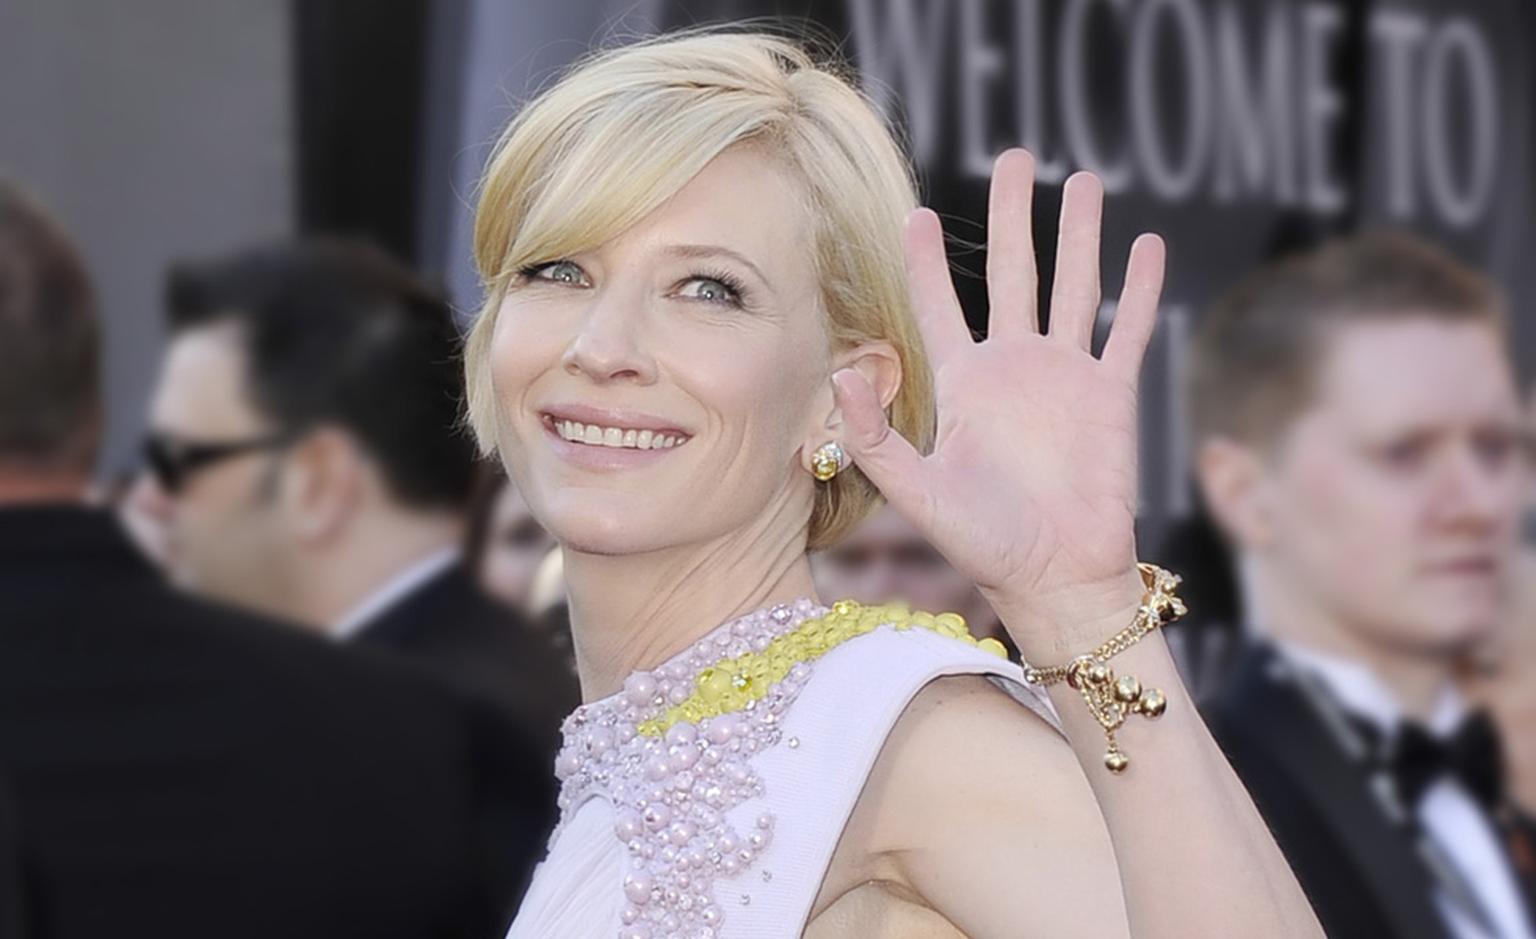 CATE BLANCHETT wears vintage Van Cleef & Arpels to the Academy Awards. The bracelet is a 1946 Tassel Diamond bracelet and the earrings are from 1981 and set with white and yellow diamonds. Photo by Kevork Djansezian, Getty Images